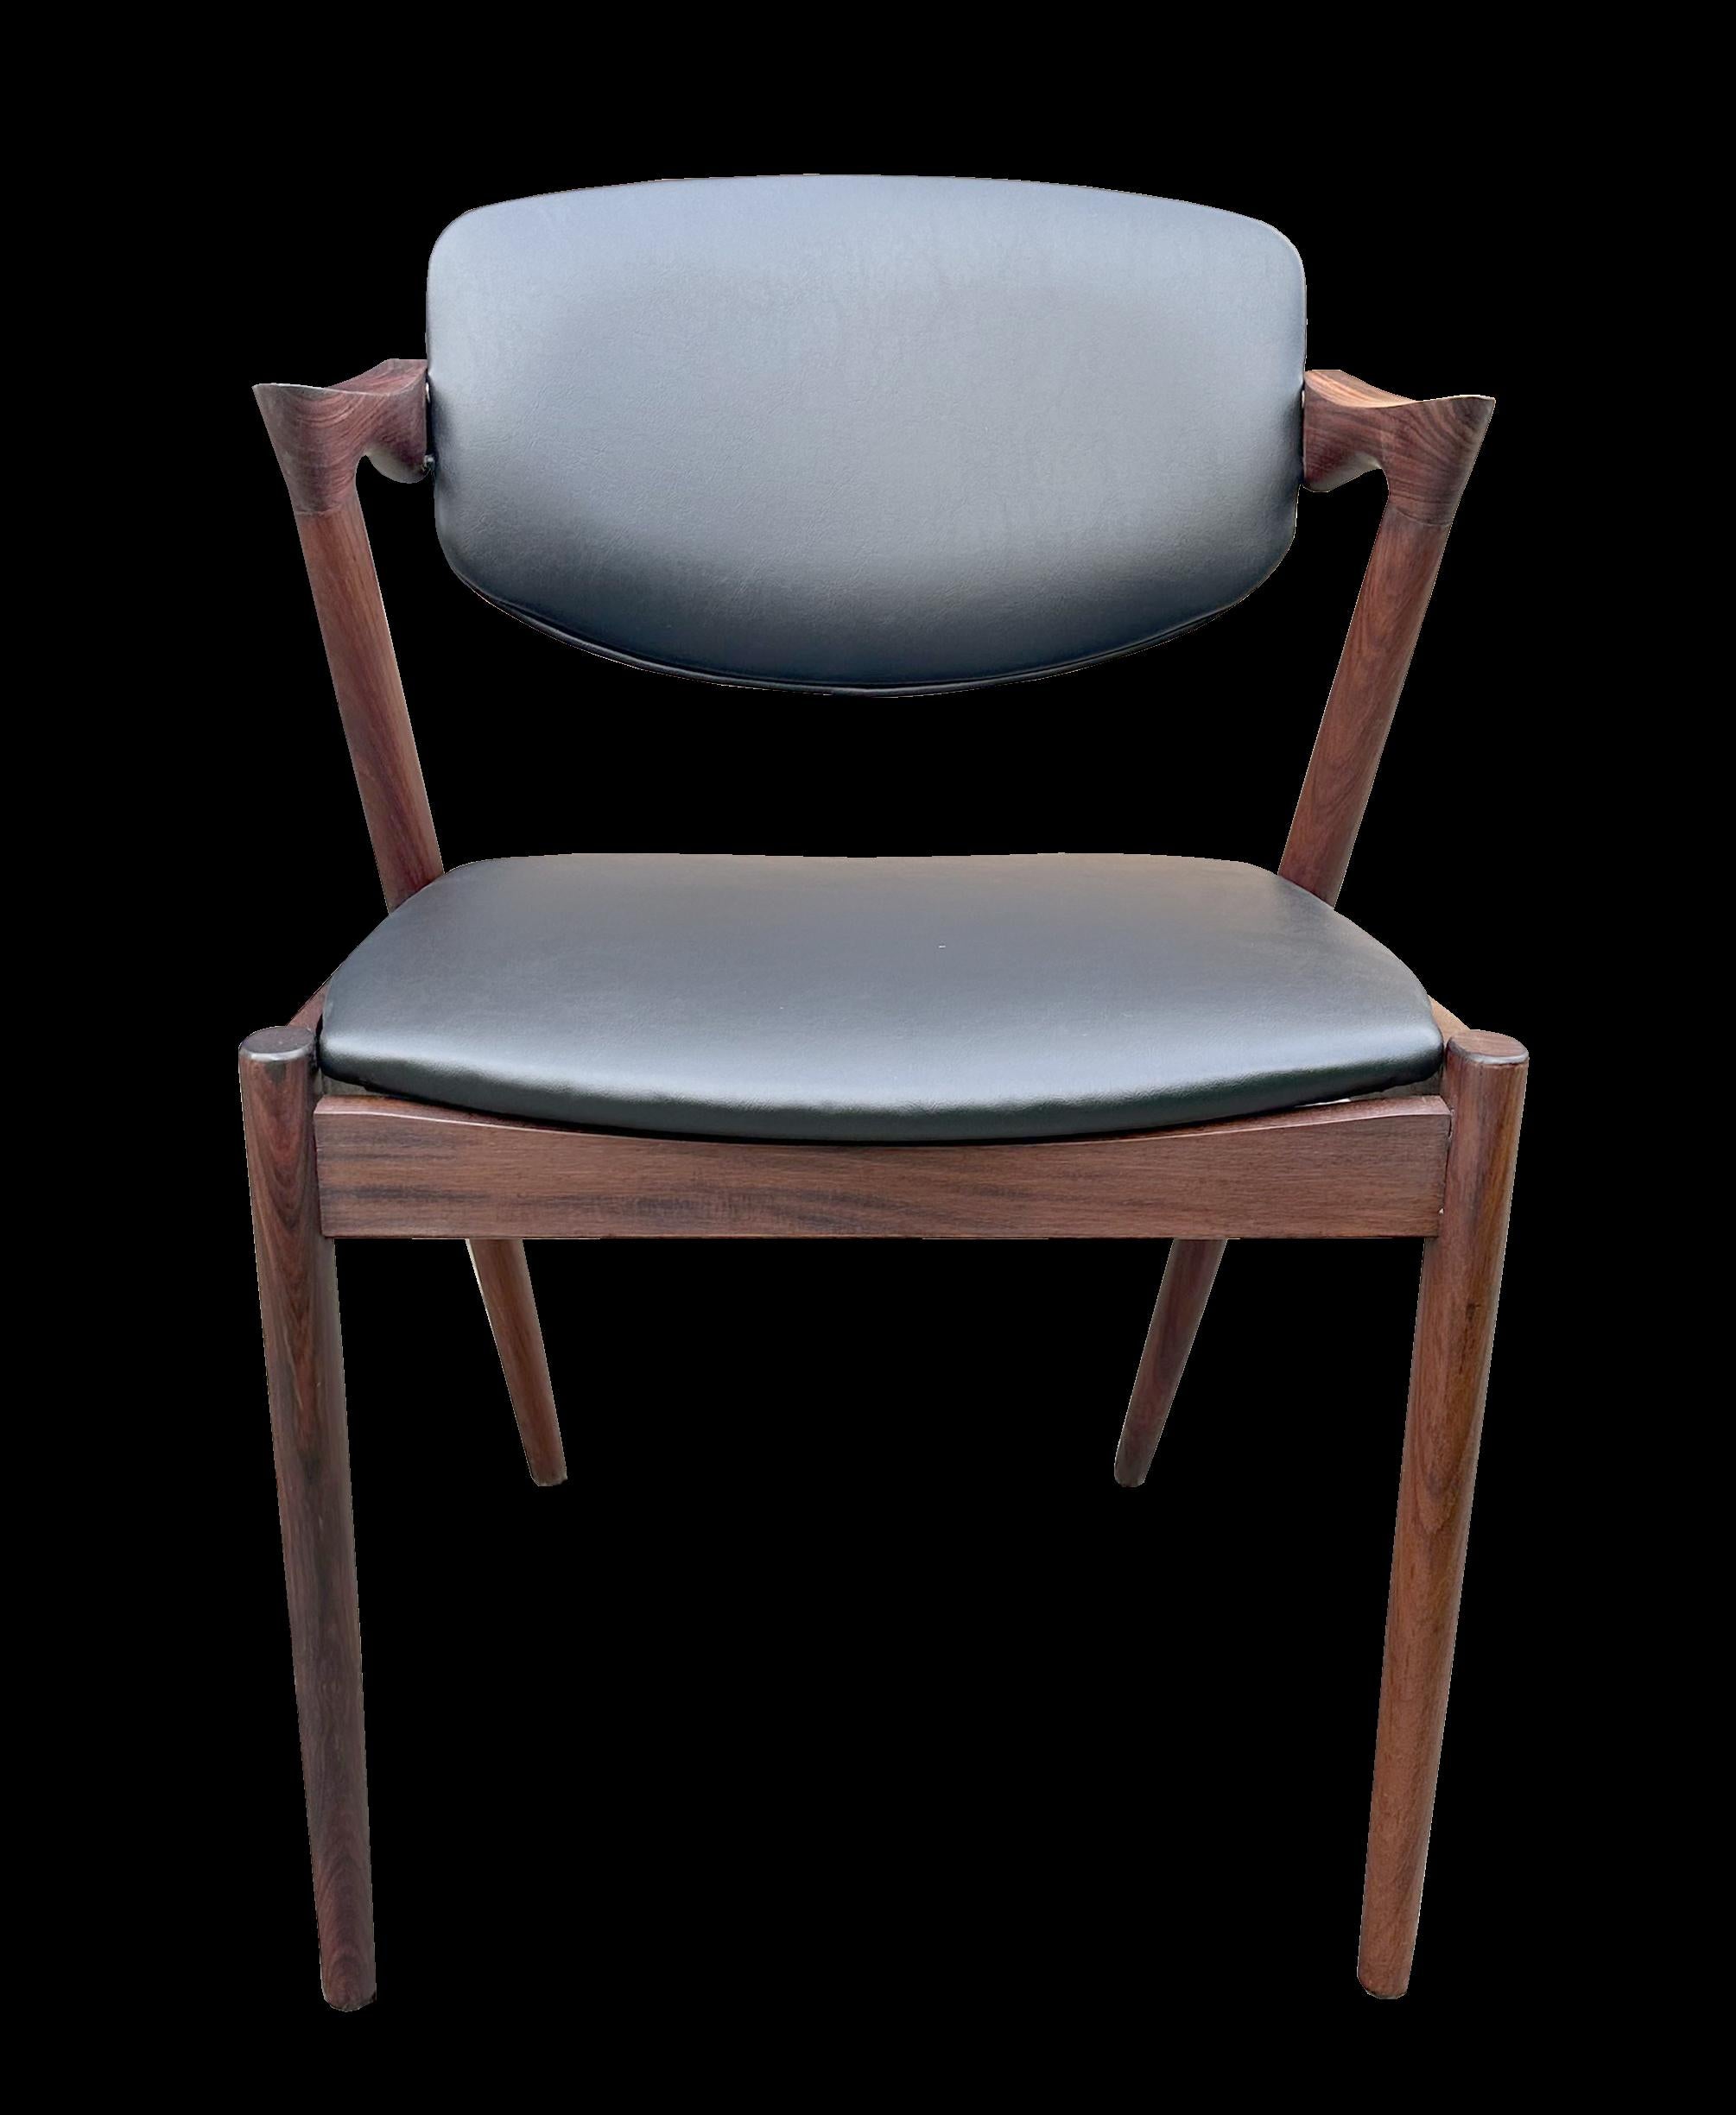 Upholstery Model 42 Armchairs in Solid Santos Rosewood by Kai Kristiansen for Schou Anderse